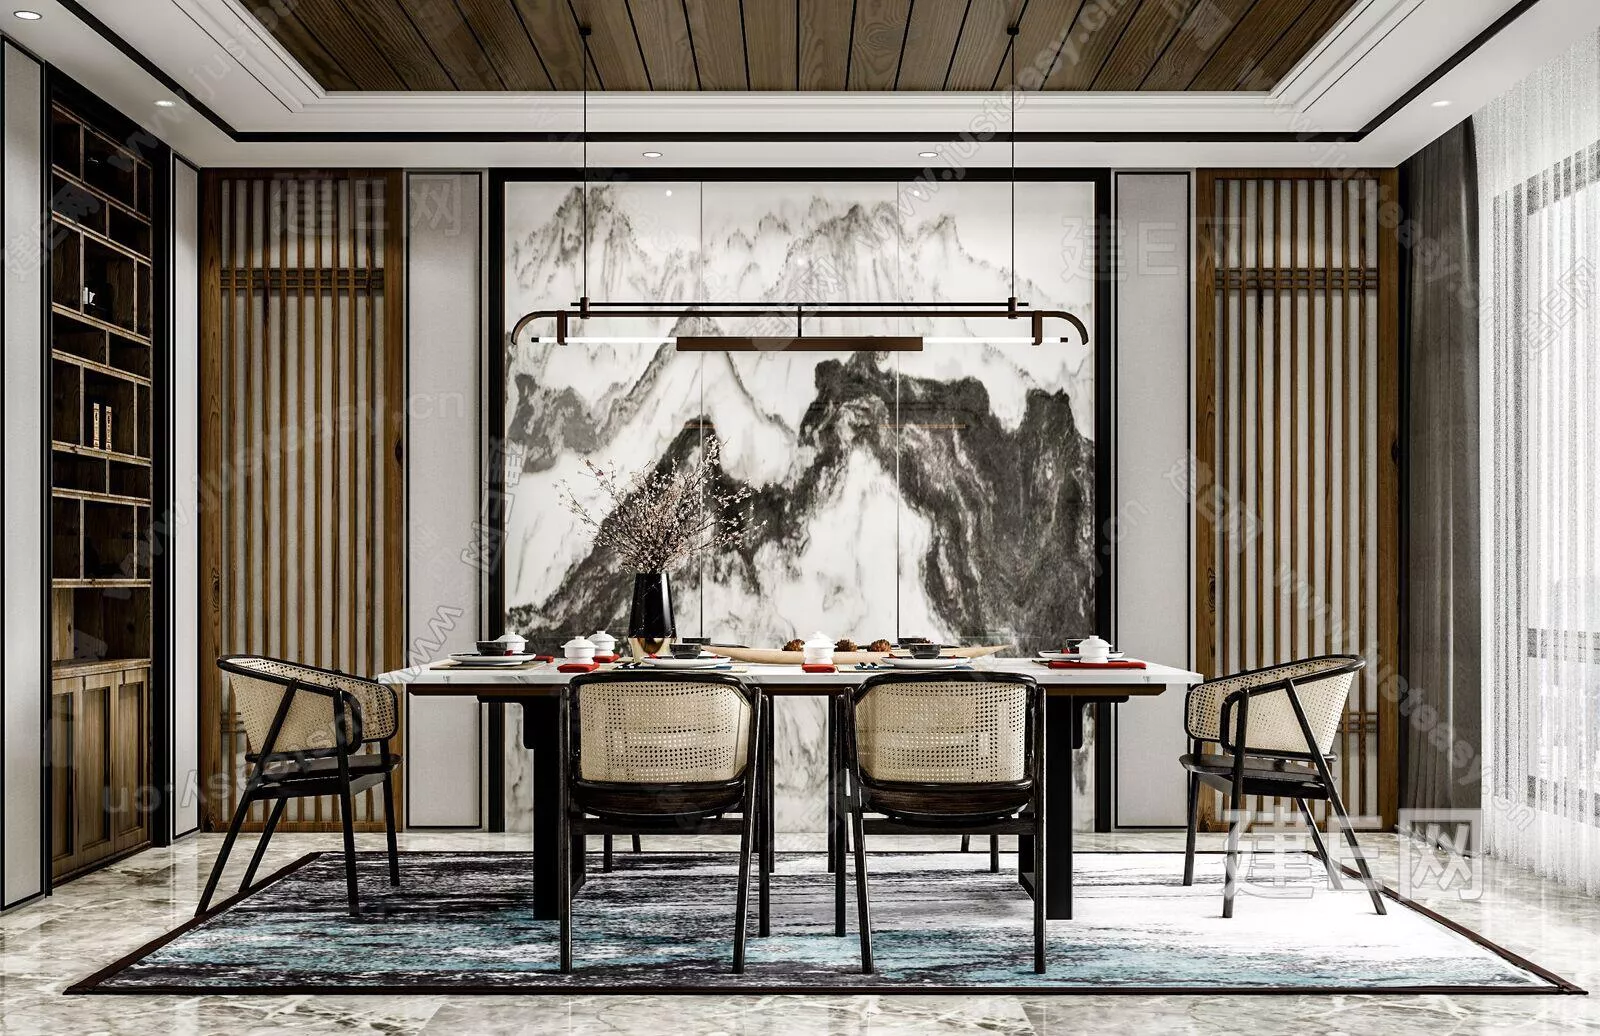 CHINESE DINING ROOM - SKETCHUP 3D SCENE - ENSCAPE - 106579334